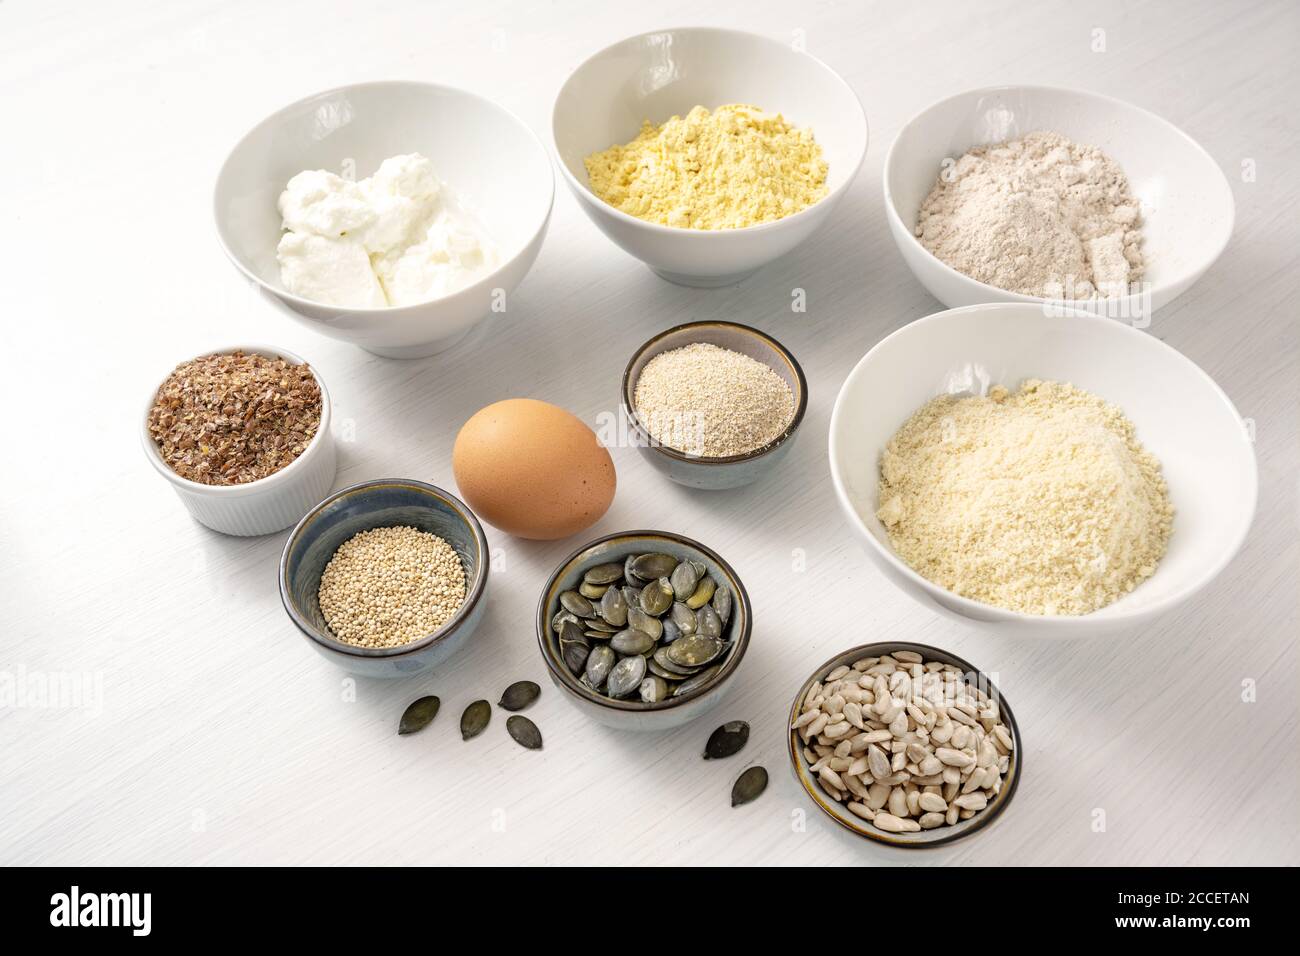 Ingredients for a protein bread with quark, oat bran, lupine flour, almond and various seeds in bowls on a white table, healthy baking for low carb or Stock Photo